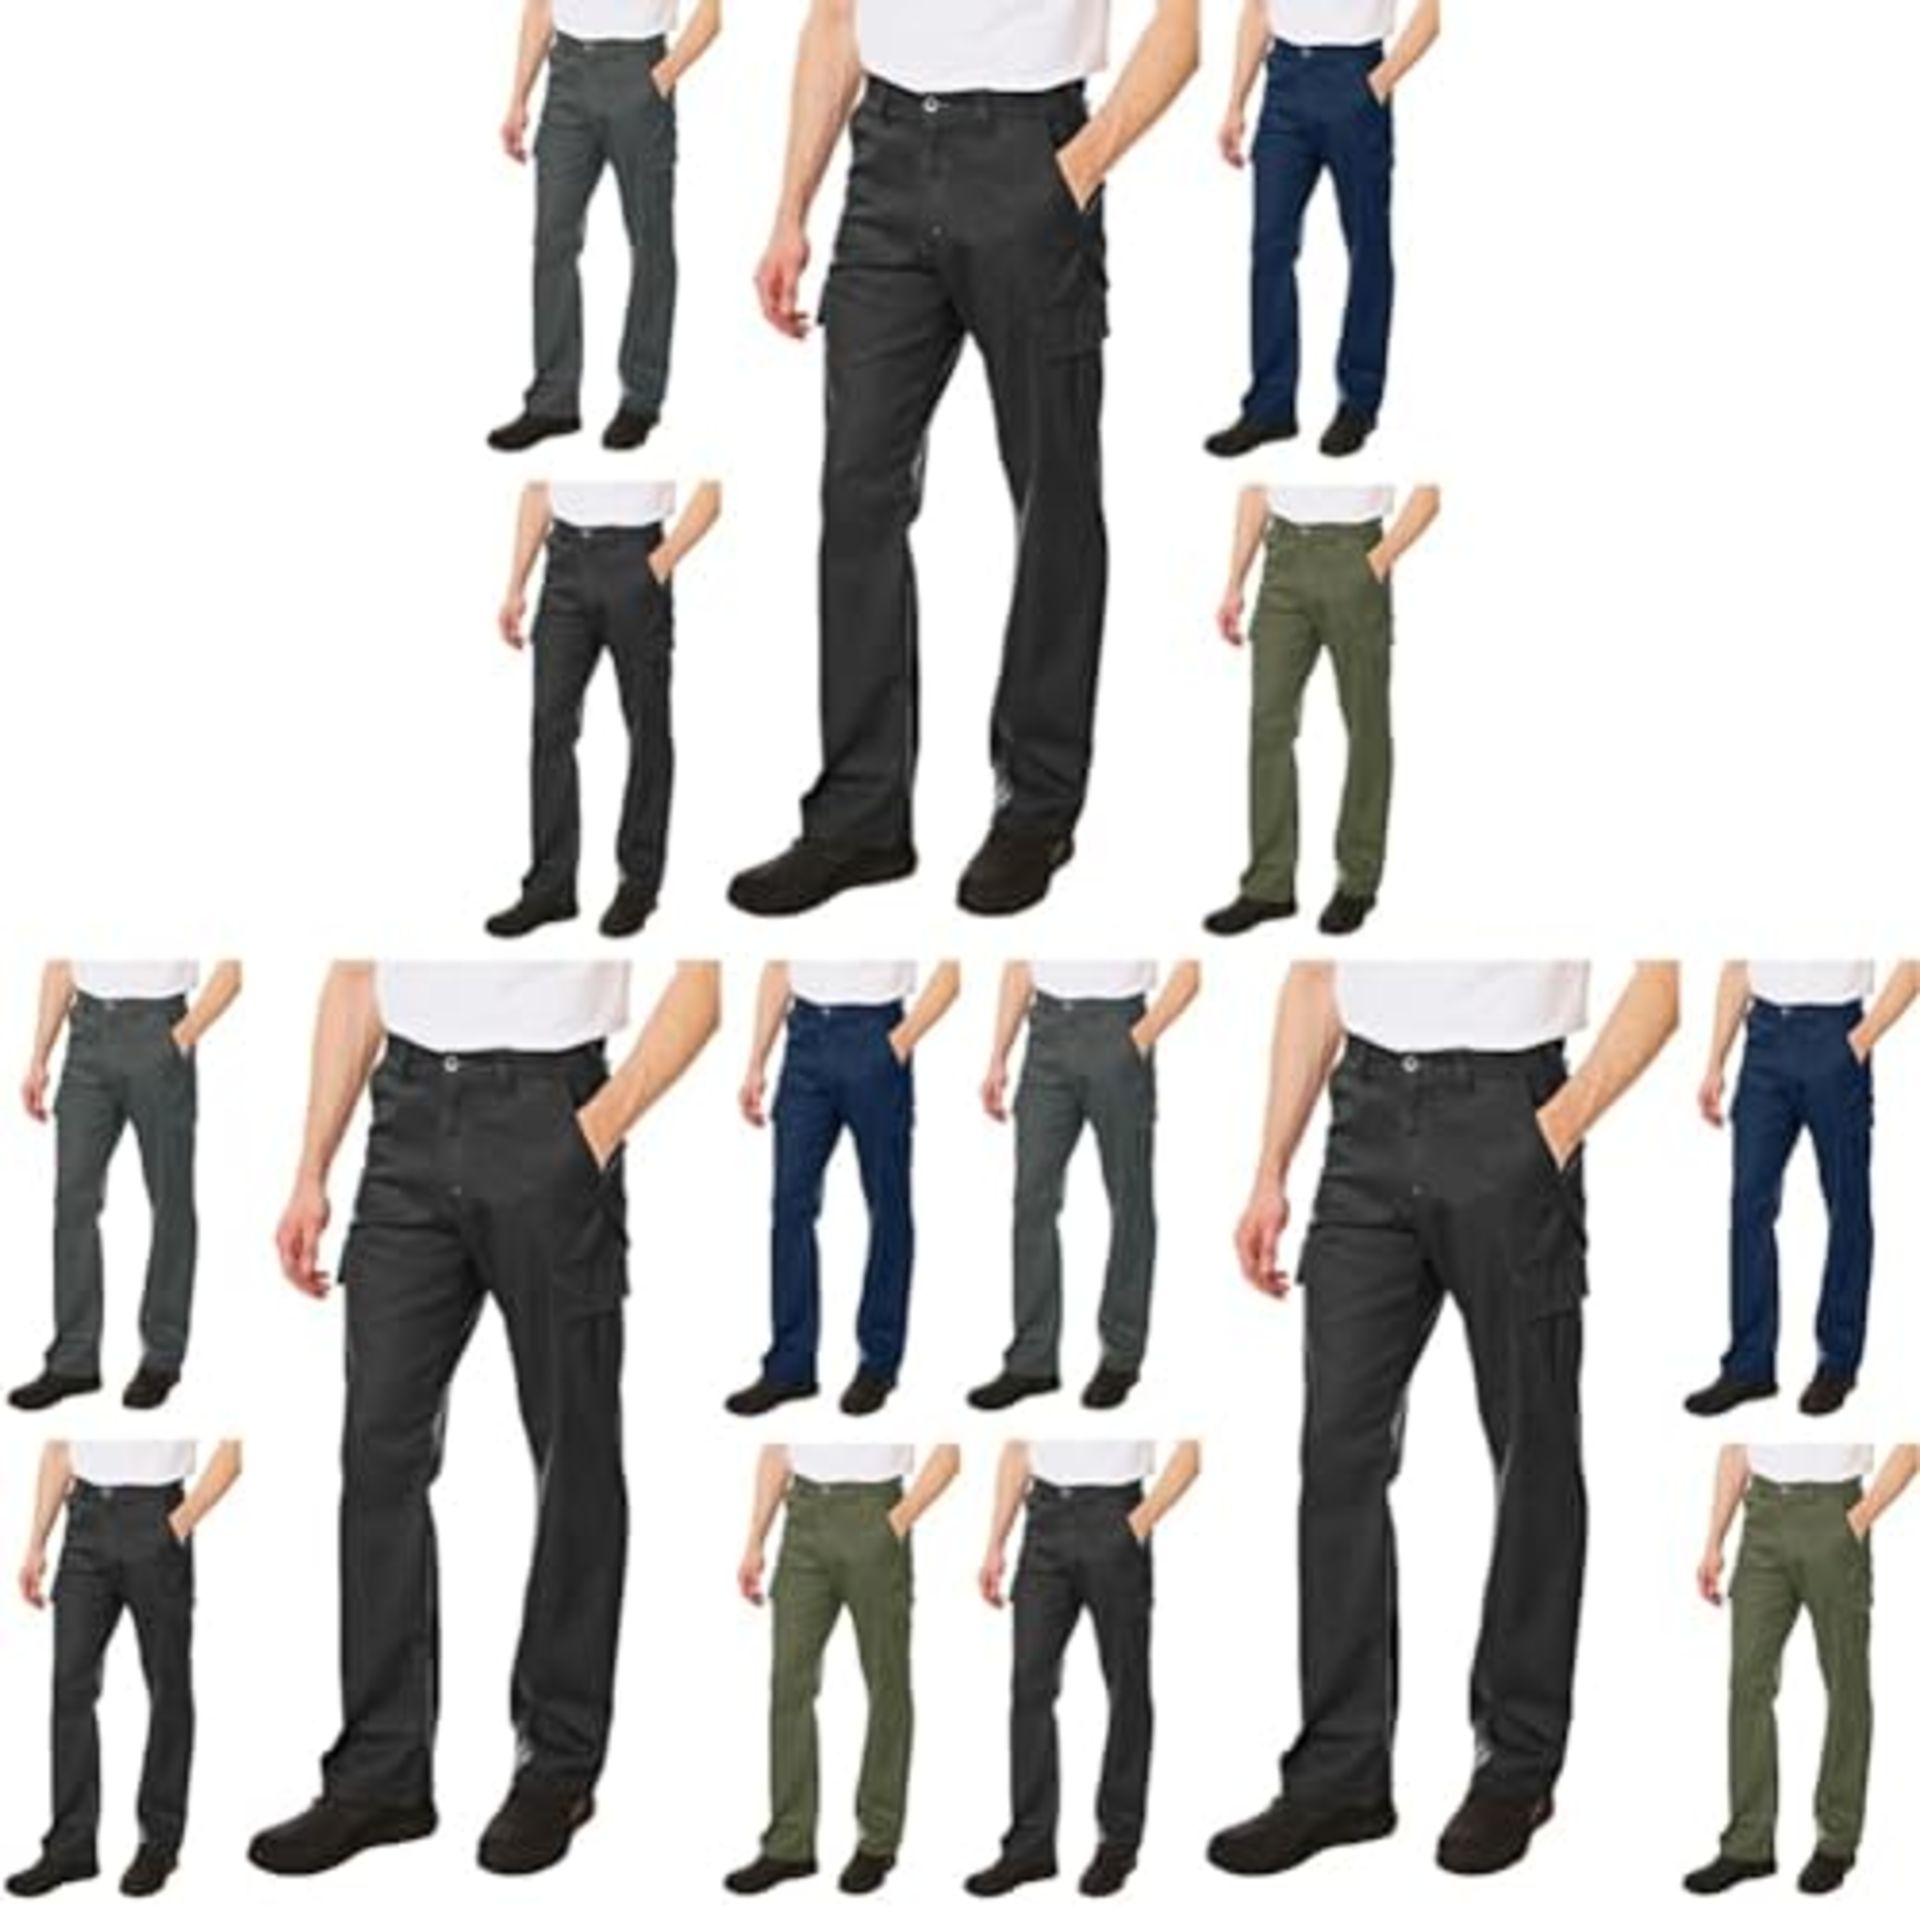 Lee Cooper Men's Heavy Duty Easy Care Multi Pocket Work Safety Classic Cargo Pants Trousers, Black..